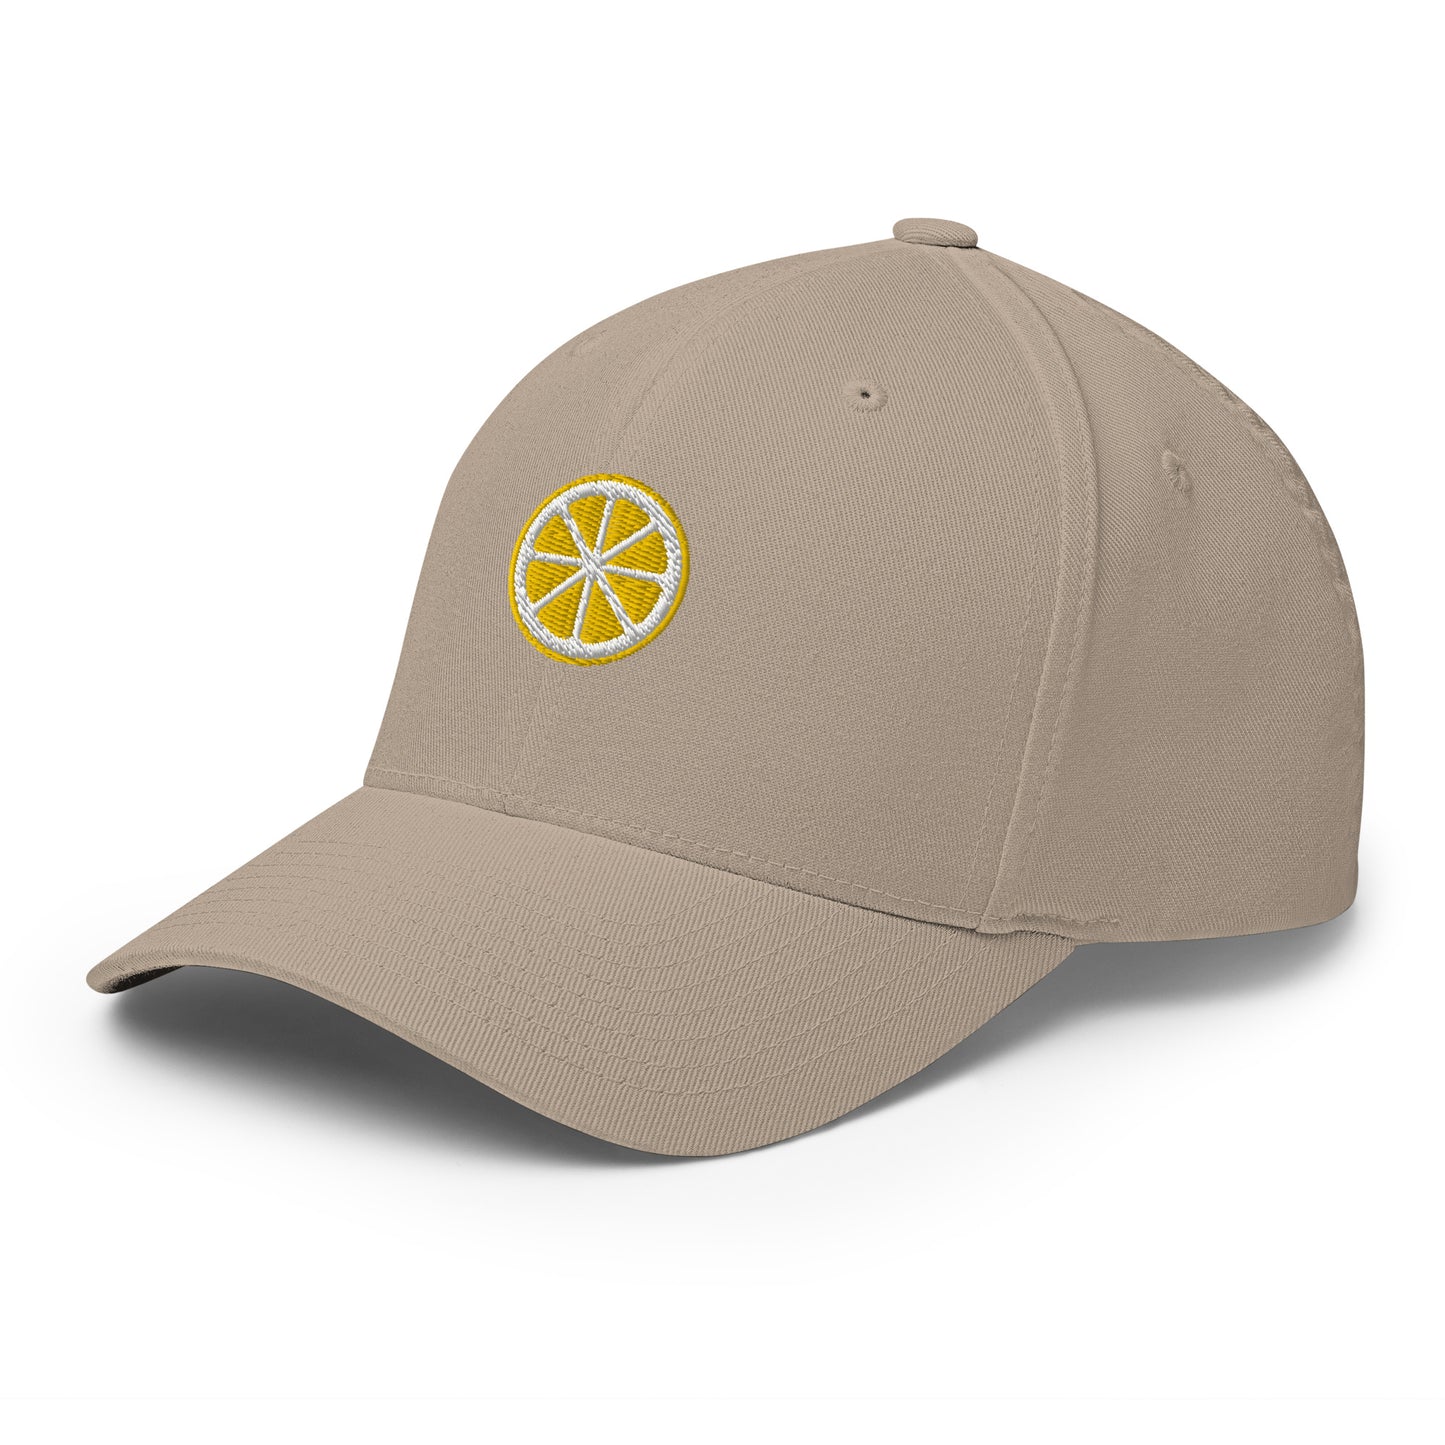 cap-from-the-front-with-lemon-symbol